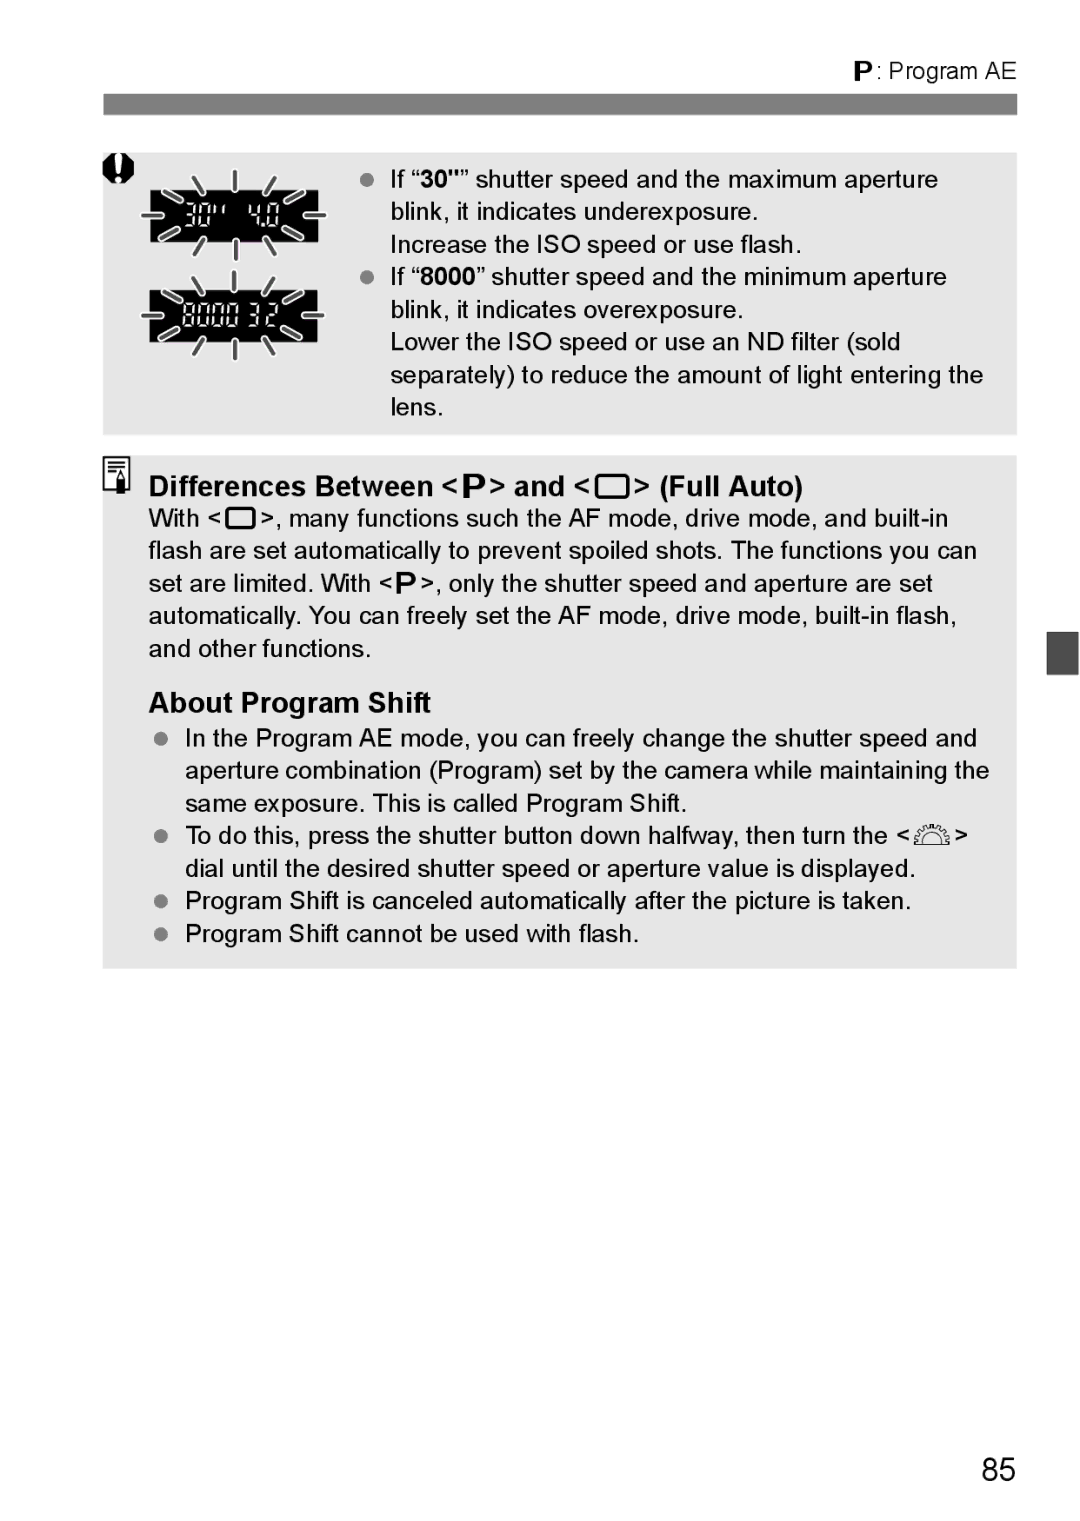 Canon EOS40D instruction manual Differences Between d and 1 Full Auto, About Program Shift 